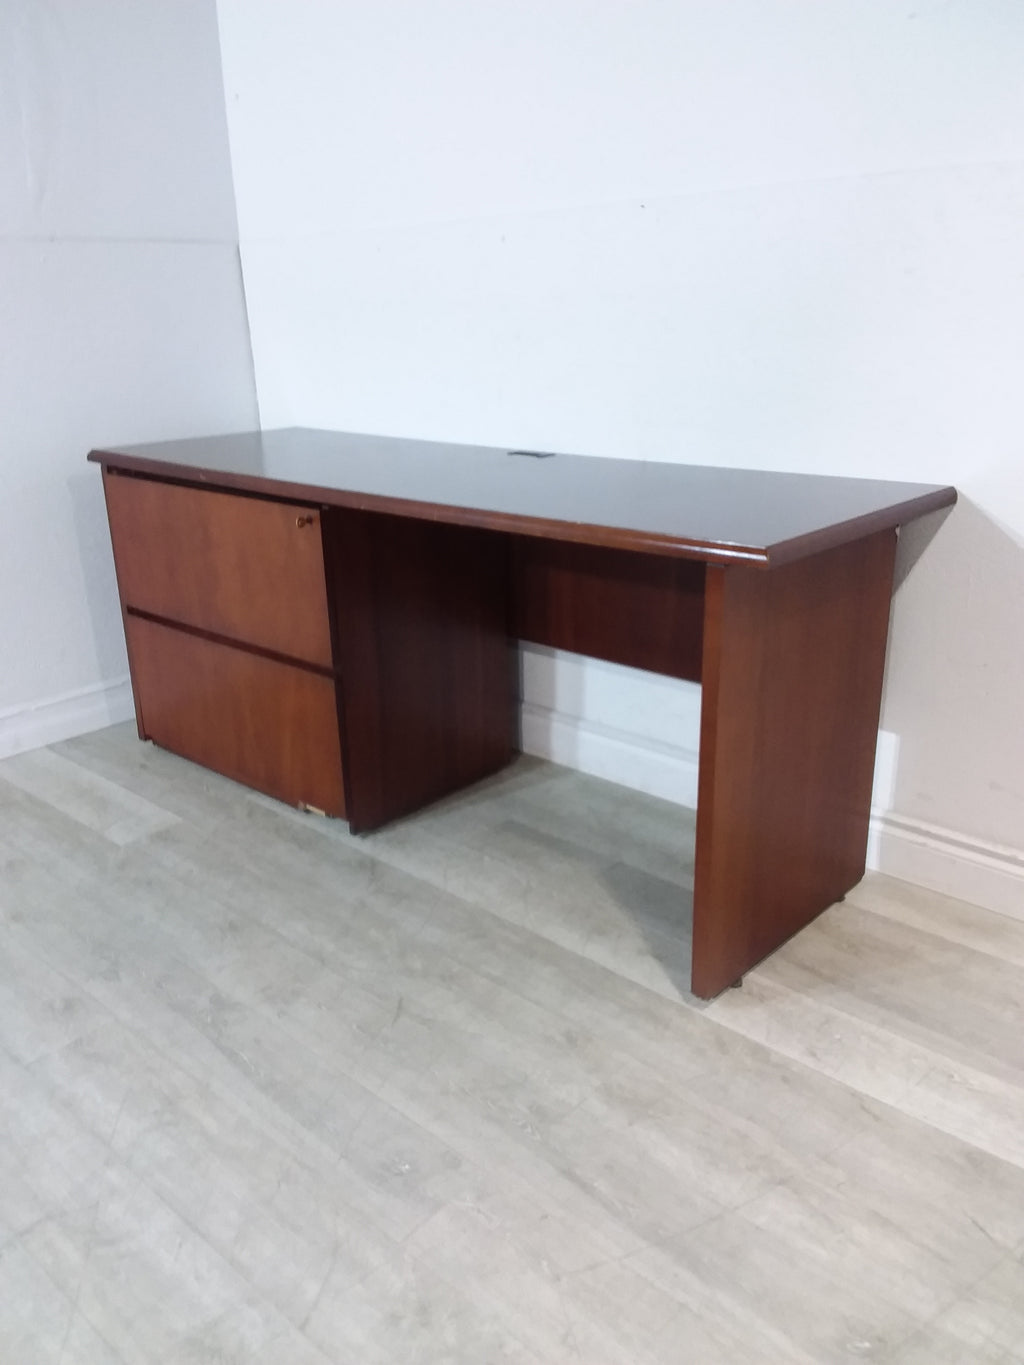 72" Wide Desk With Filing Cabinet